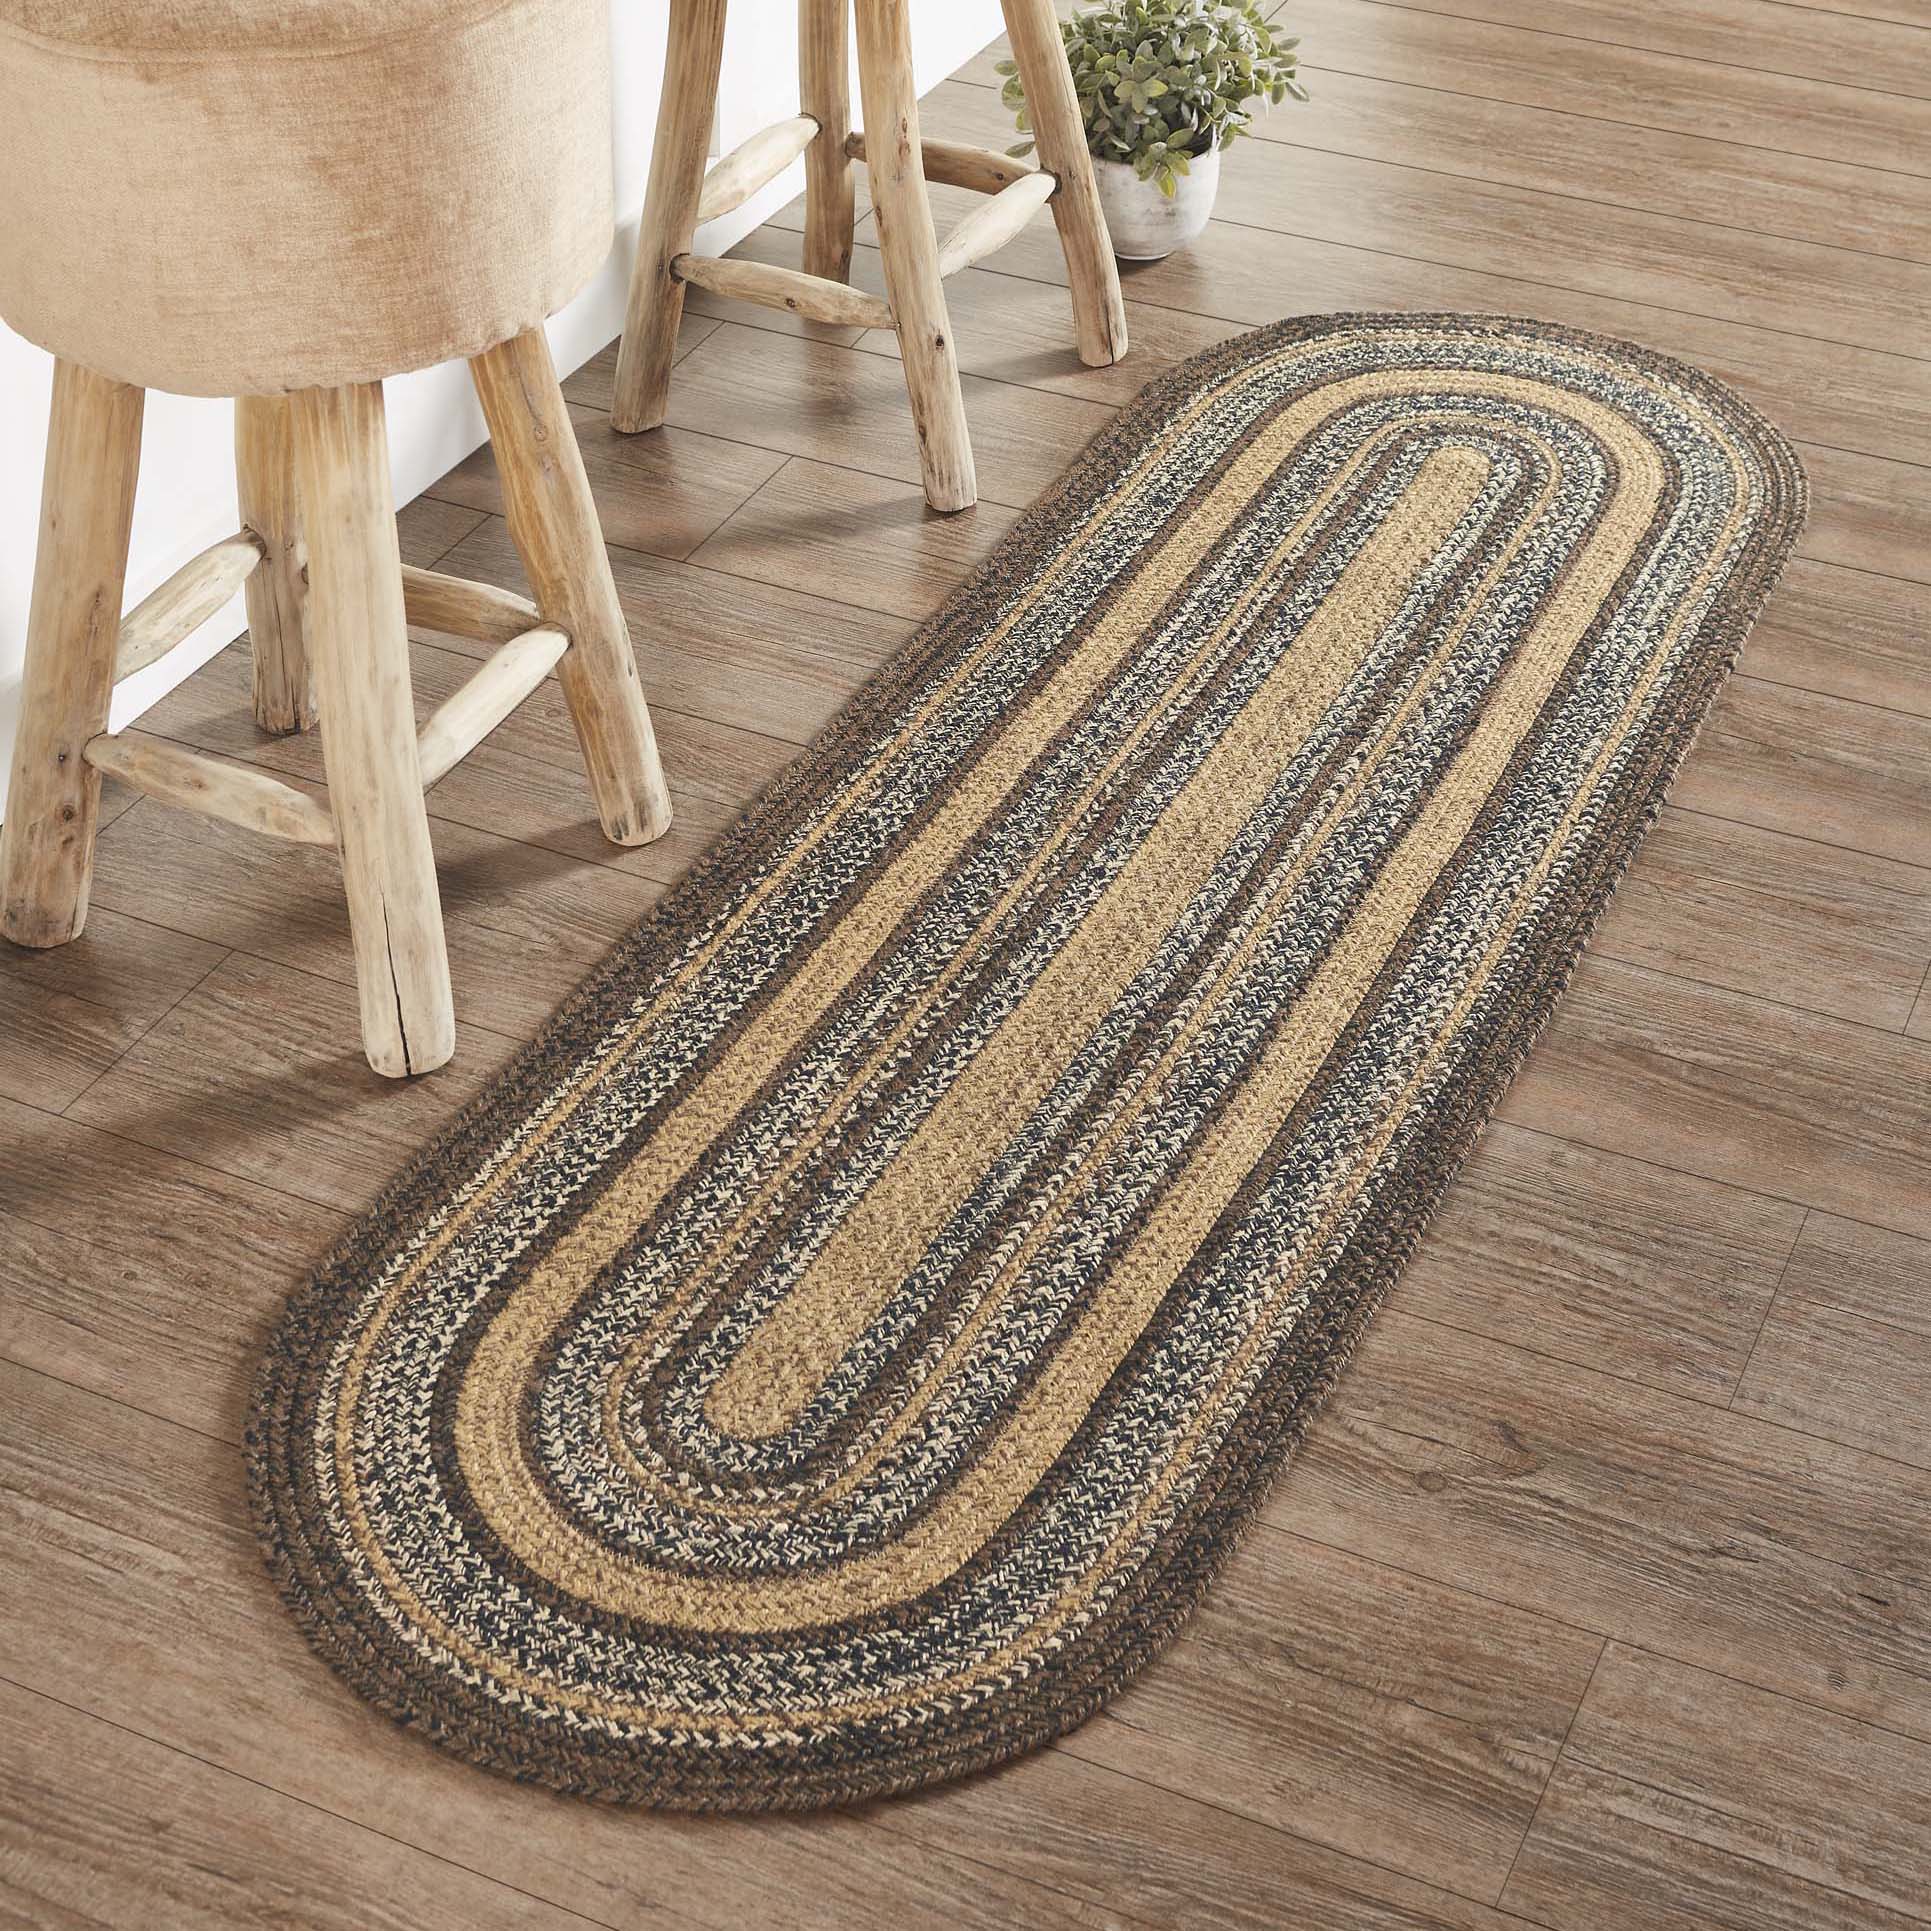 Espresso Jute Rug/Runner Oval w/ Pad 22x72 – Beth's Country Primitive Home  Decor